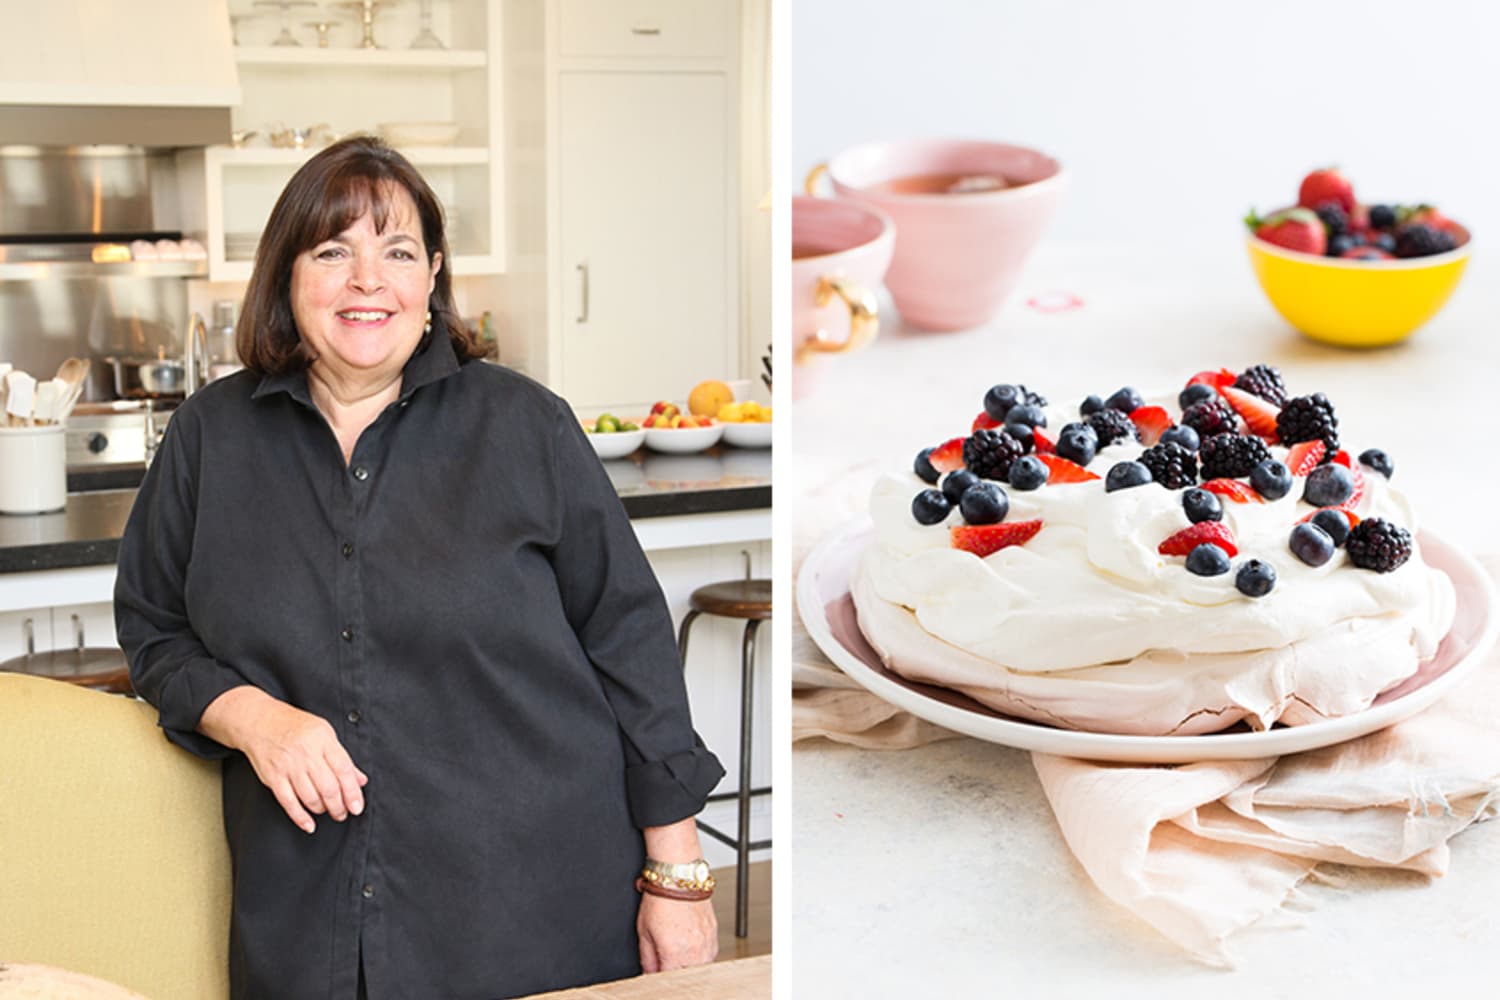 Ina Garten Shares 5 Delicious Desserts to Make Before Summer Ends | The ...